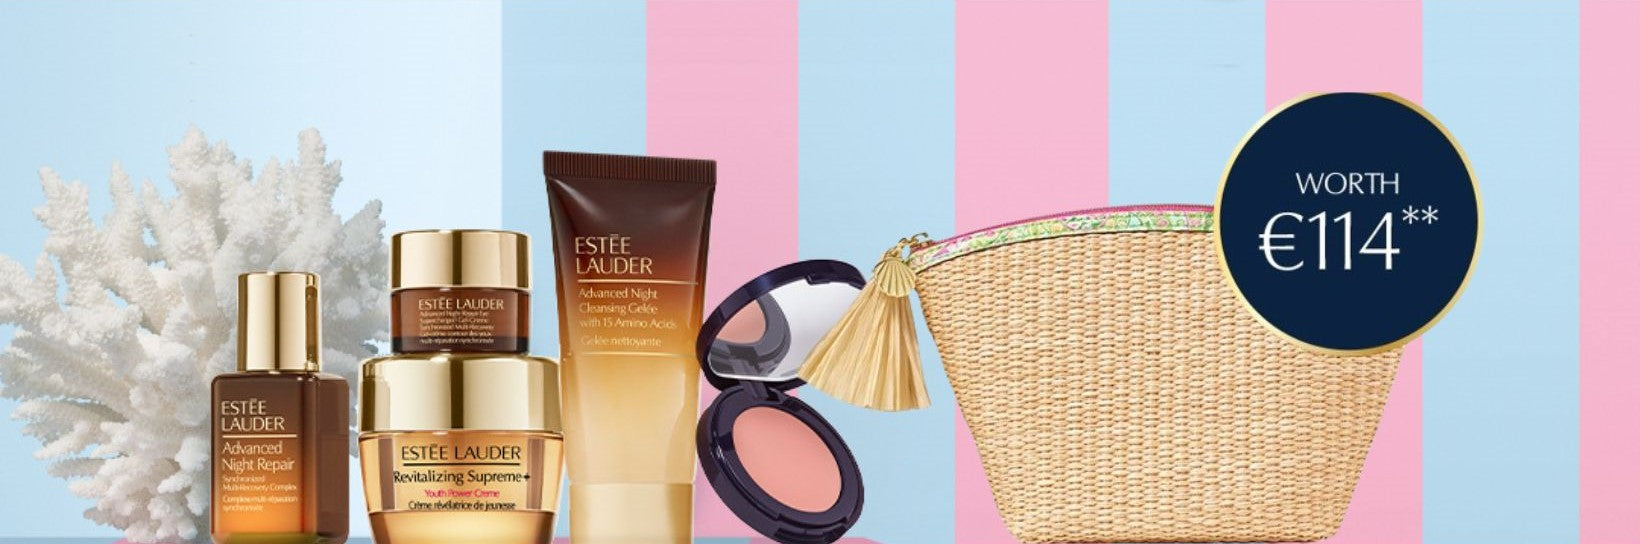 Estee Lauder Gift with Purchase at Dillard's – GWP Addict